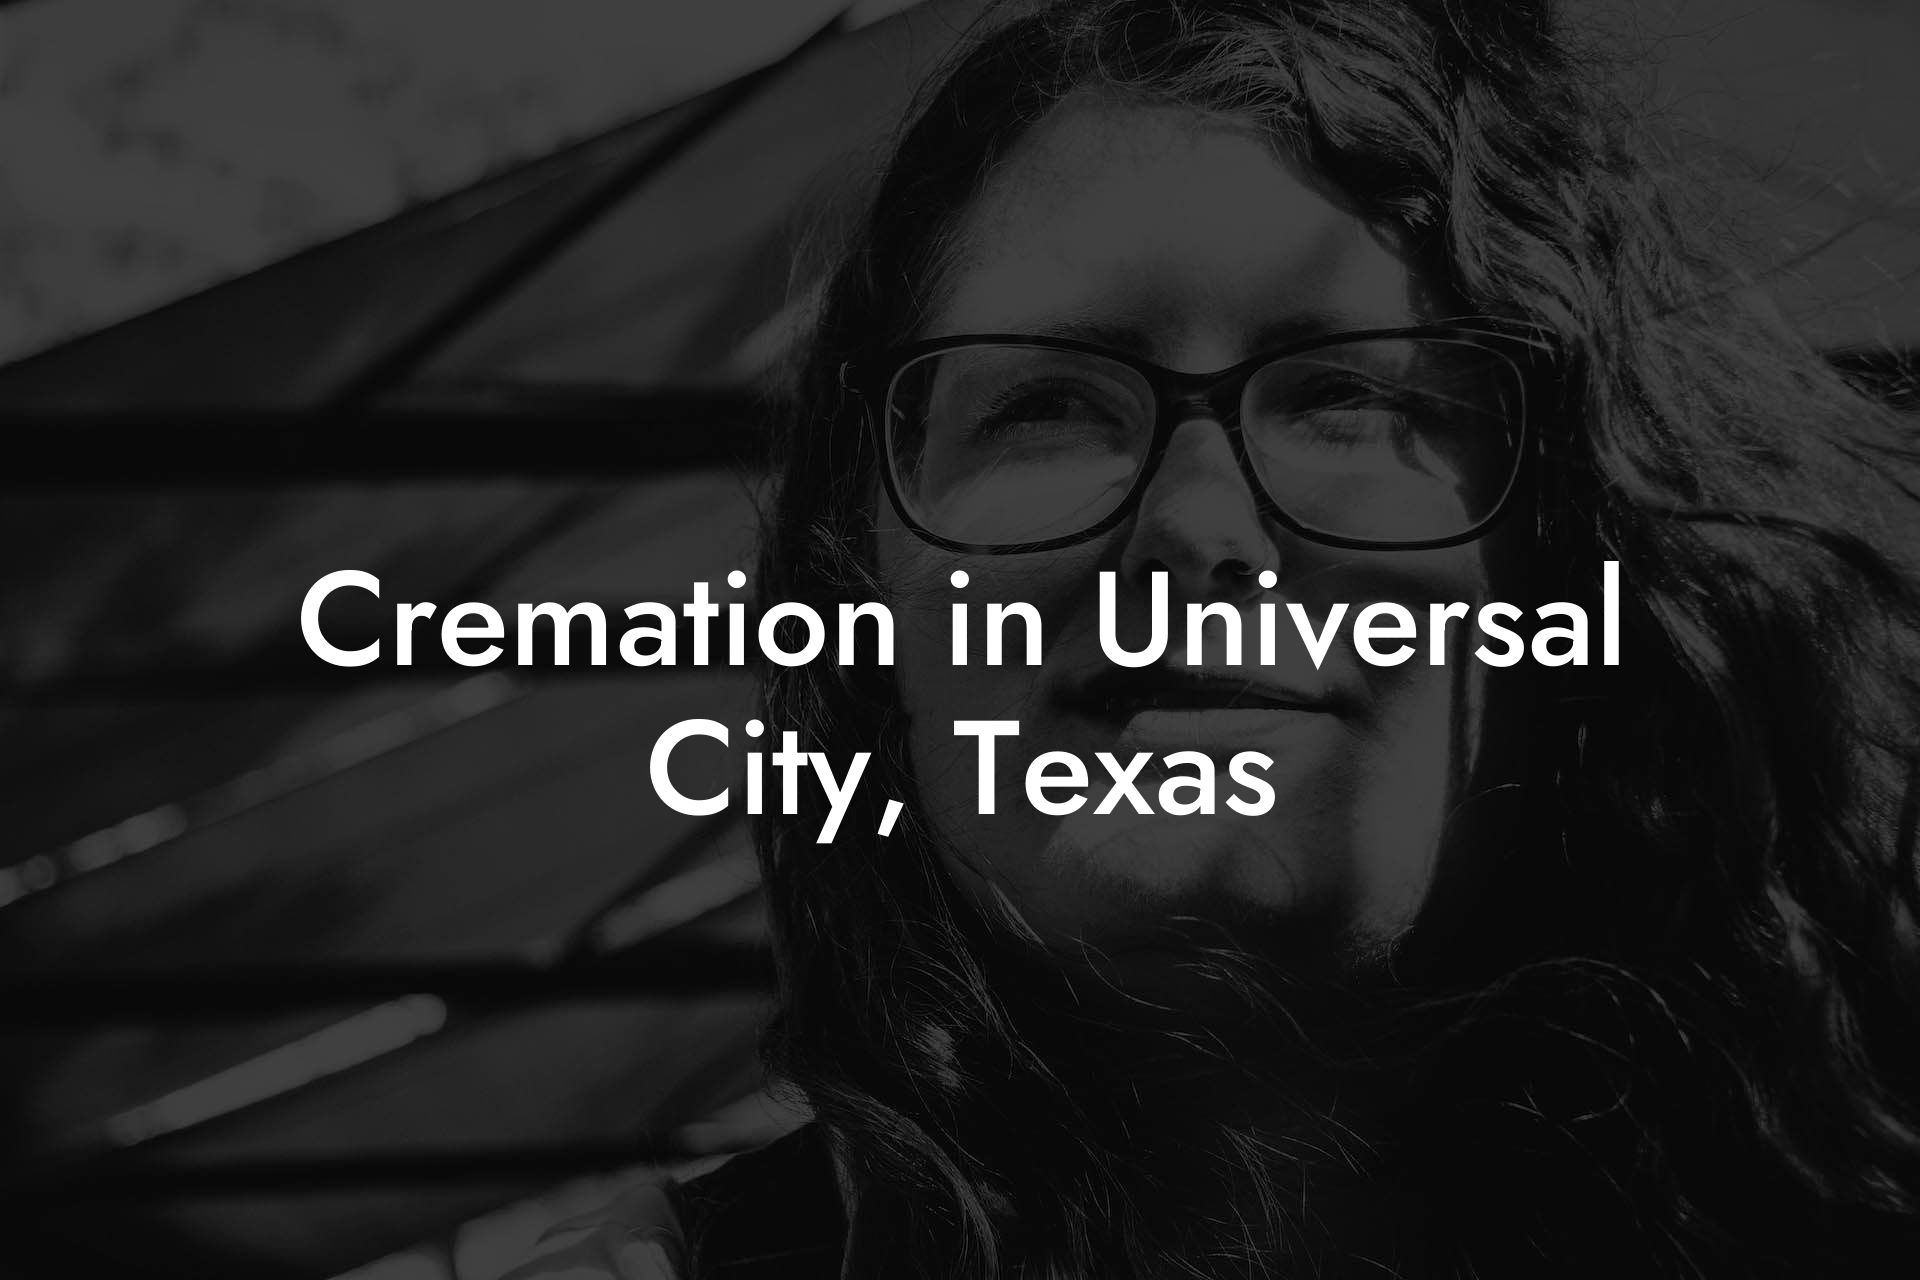 Cremation in Universal City, Texas